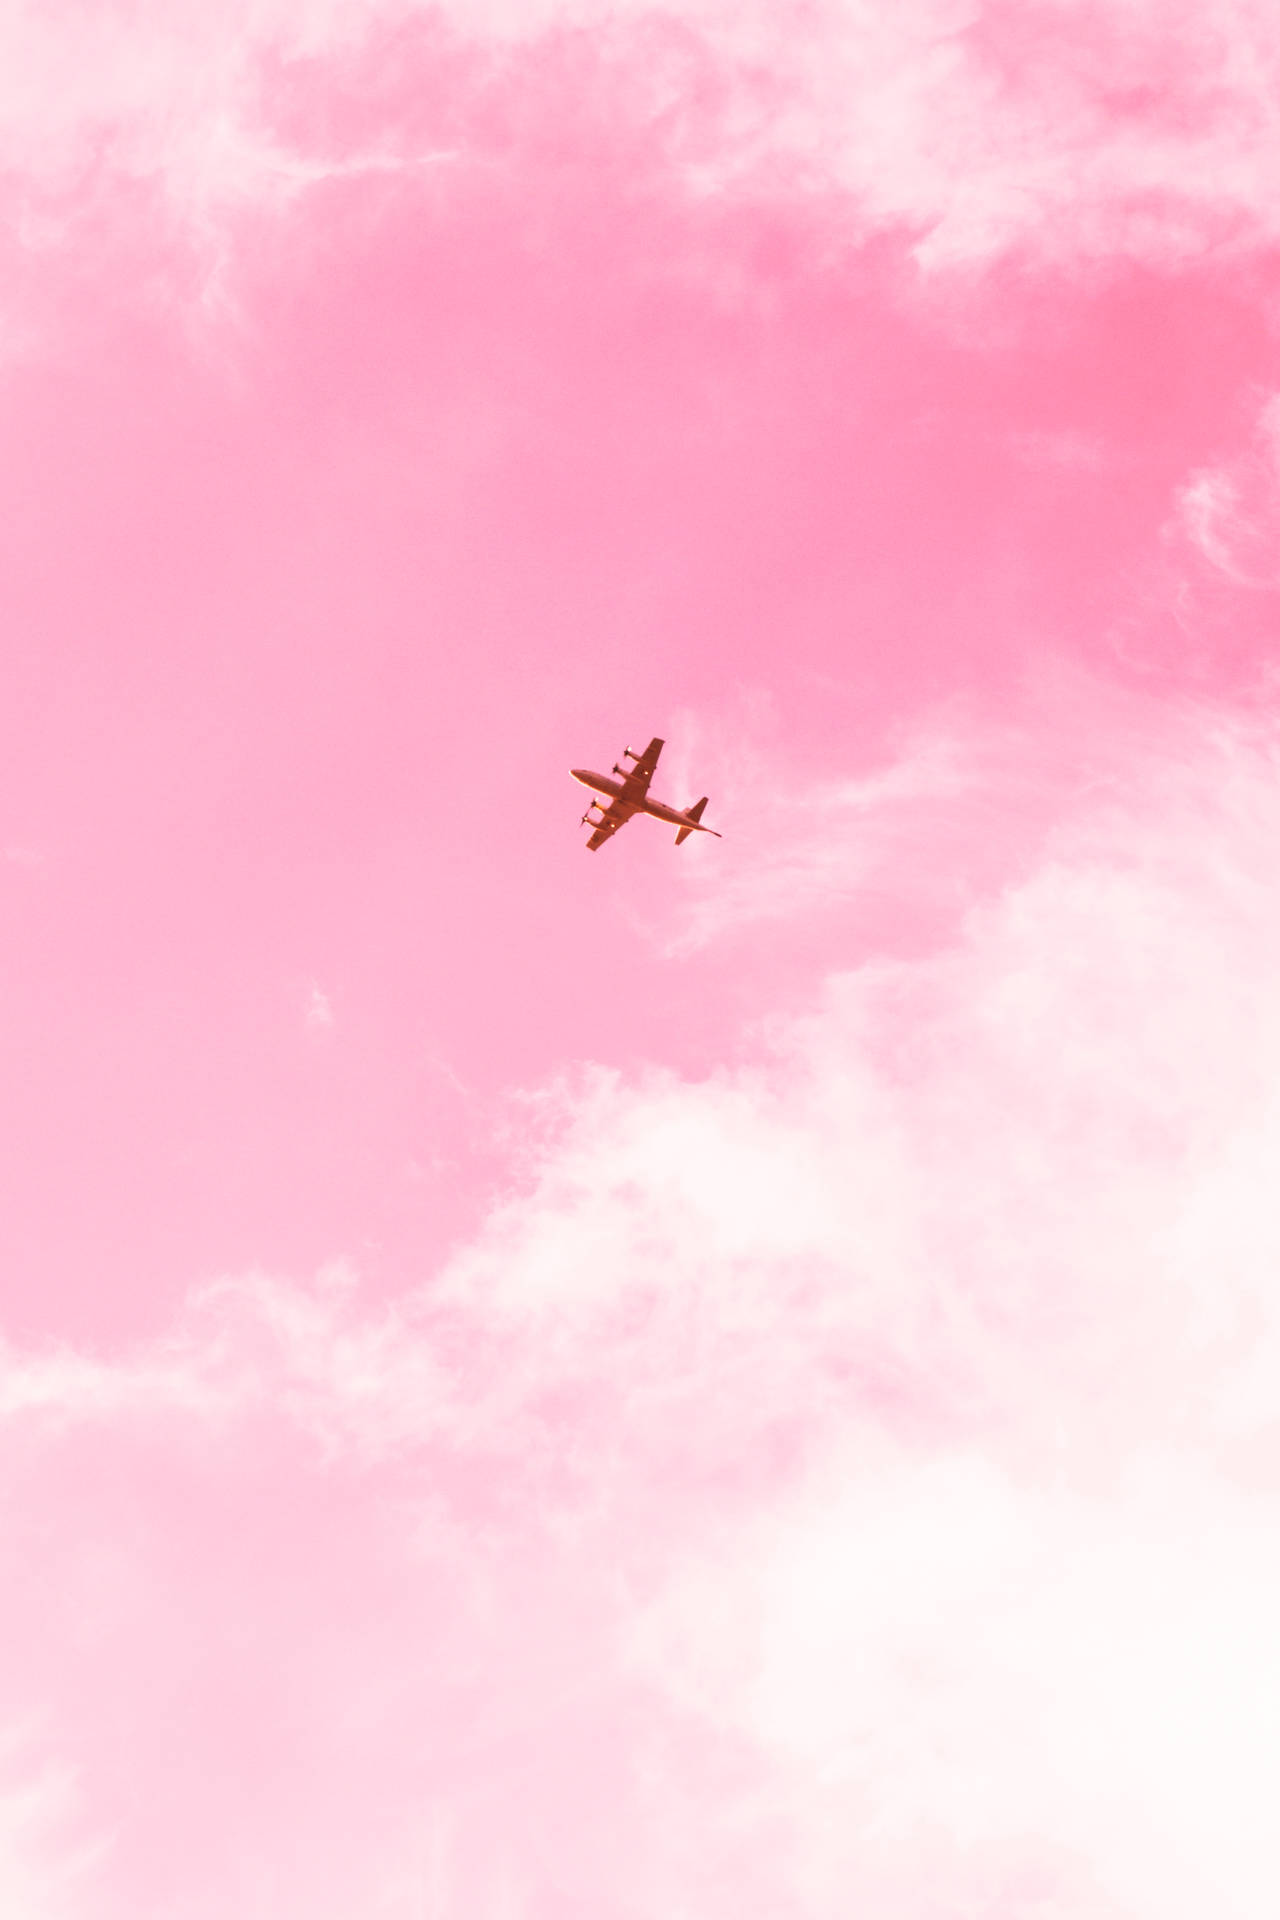 2666X3999 Pink Aesthetic Wallpaper and Background